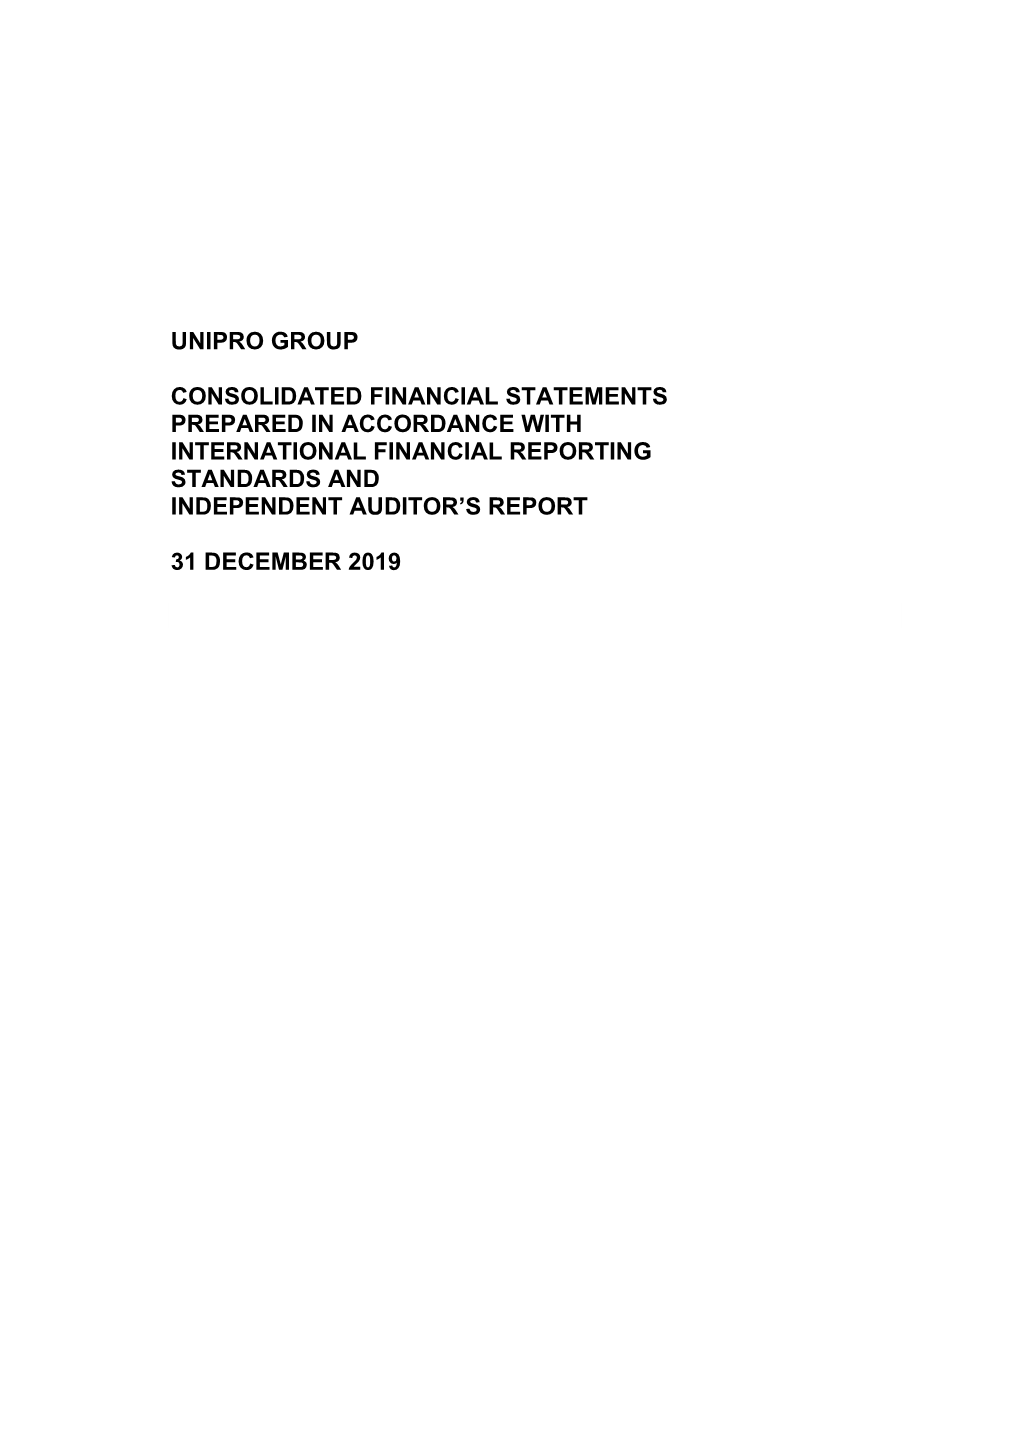 Unipro Group Consolidated Financial Statements Prepared in Accordance with International Financial Reporting Standards And